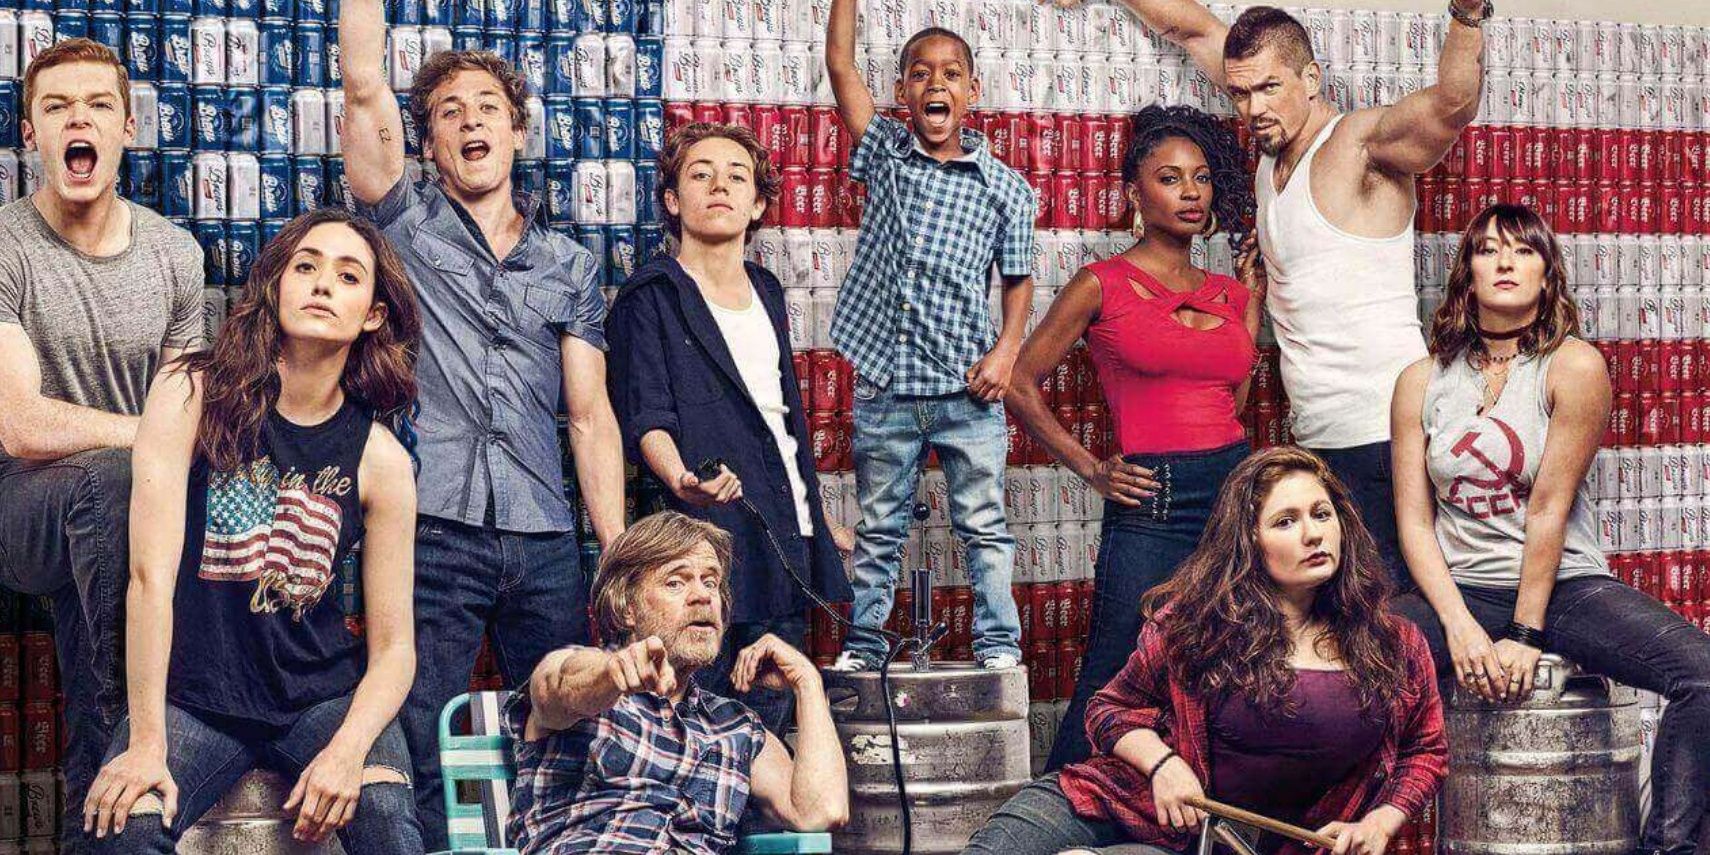 The cast of Shameless poses for a promotional photo